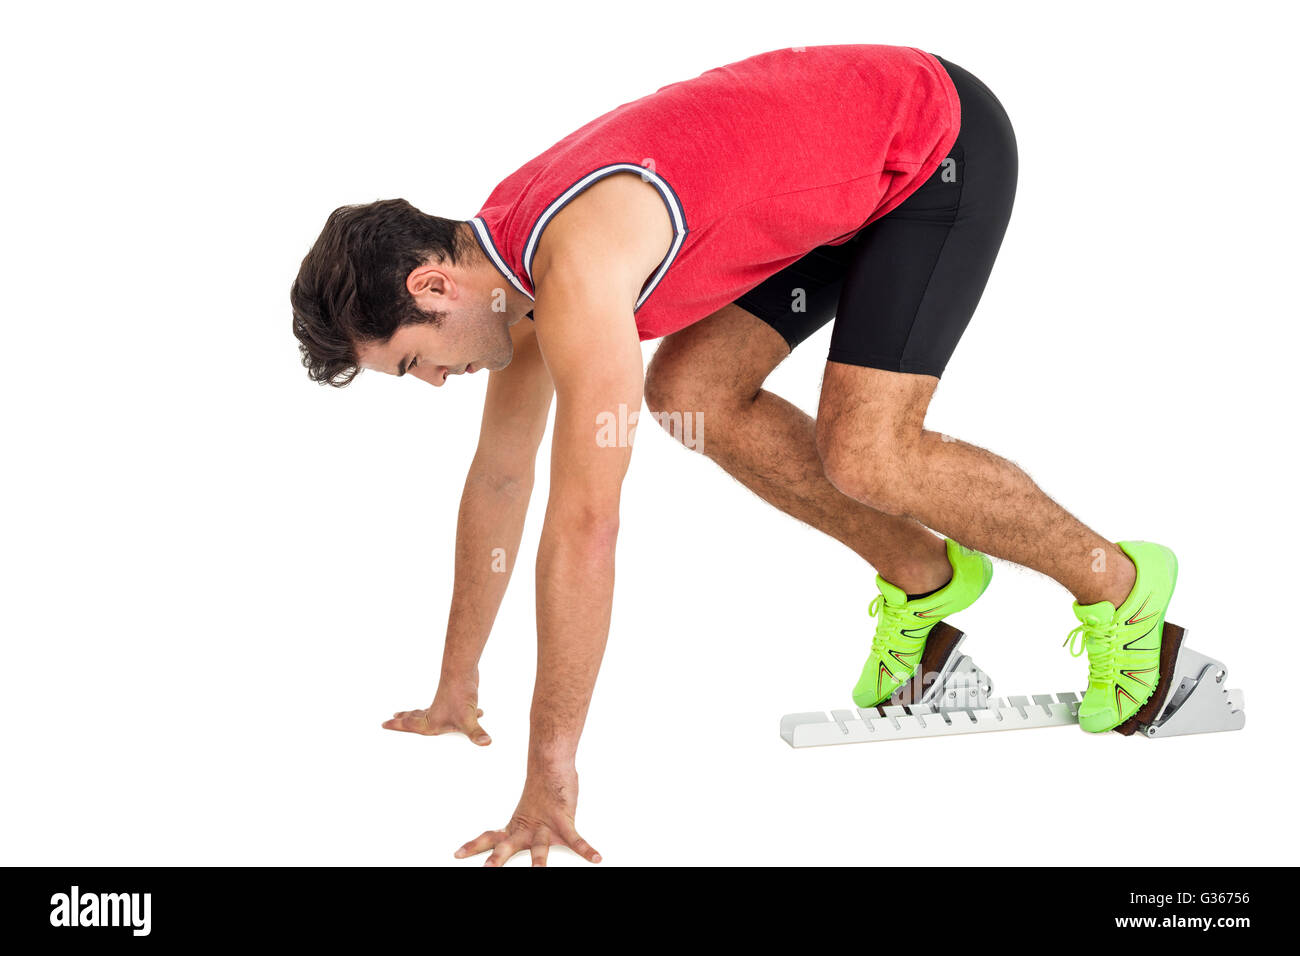 Male athlete in ready to run position Stock Photo